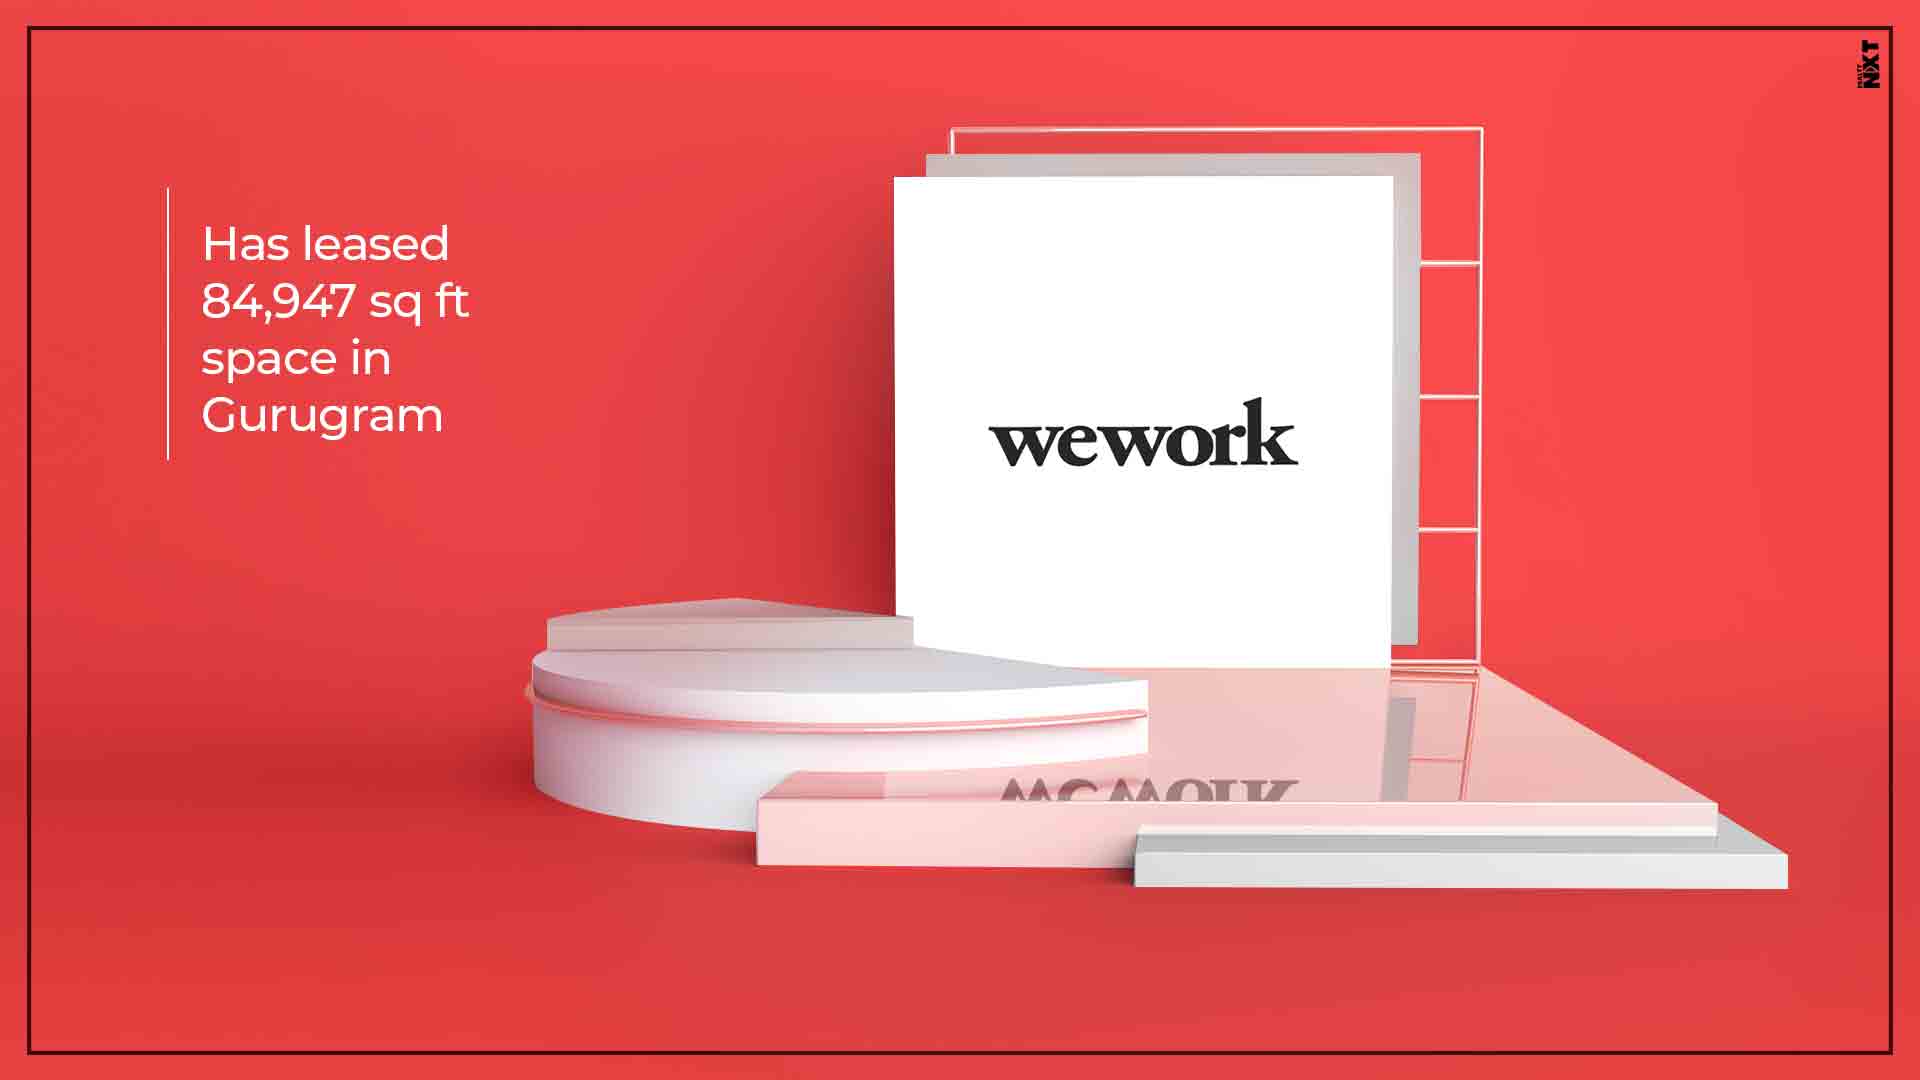 WeWork leases about 85,000 sq ft co-working space in Gurugram